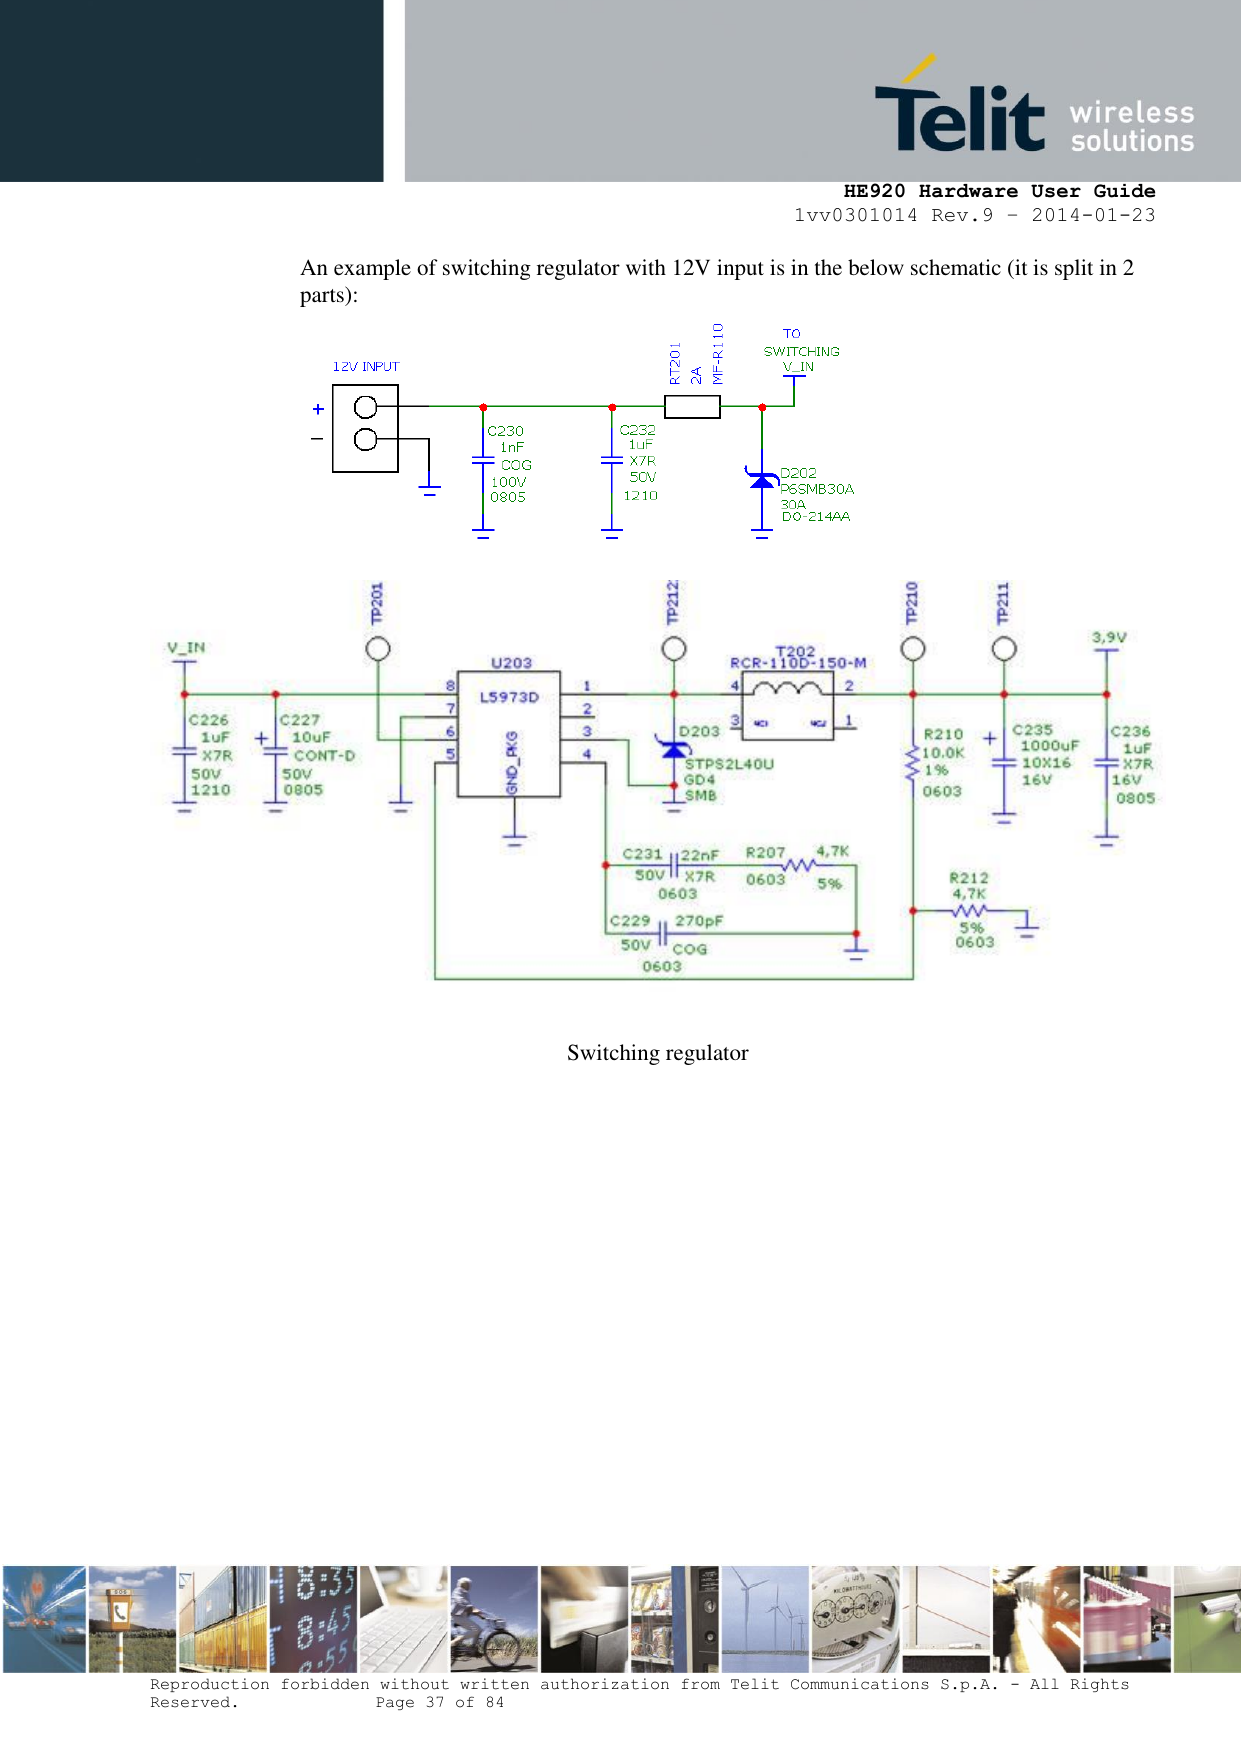     HE920 Hardware User Guide 1vv0301014 Rev.9 – 2014-01-23 Reproduction forbidden without written authorization from Telit Communications S.p.A. - All Rights Reserved.    Page 37 of 84  An example of switching regulator with 12V input is in the below schematic (it is split in 2 parts):  Switching regulator